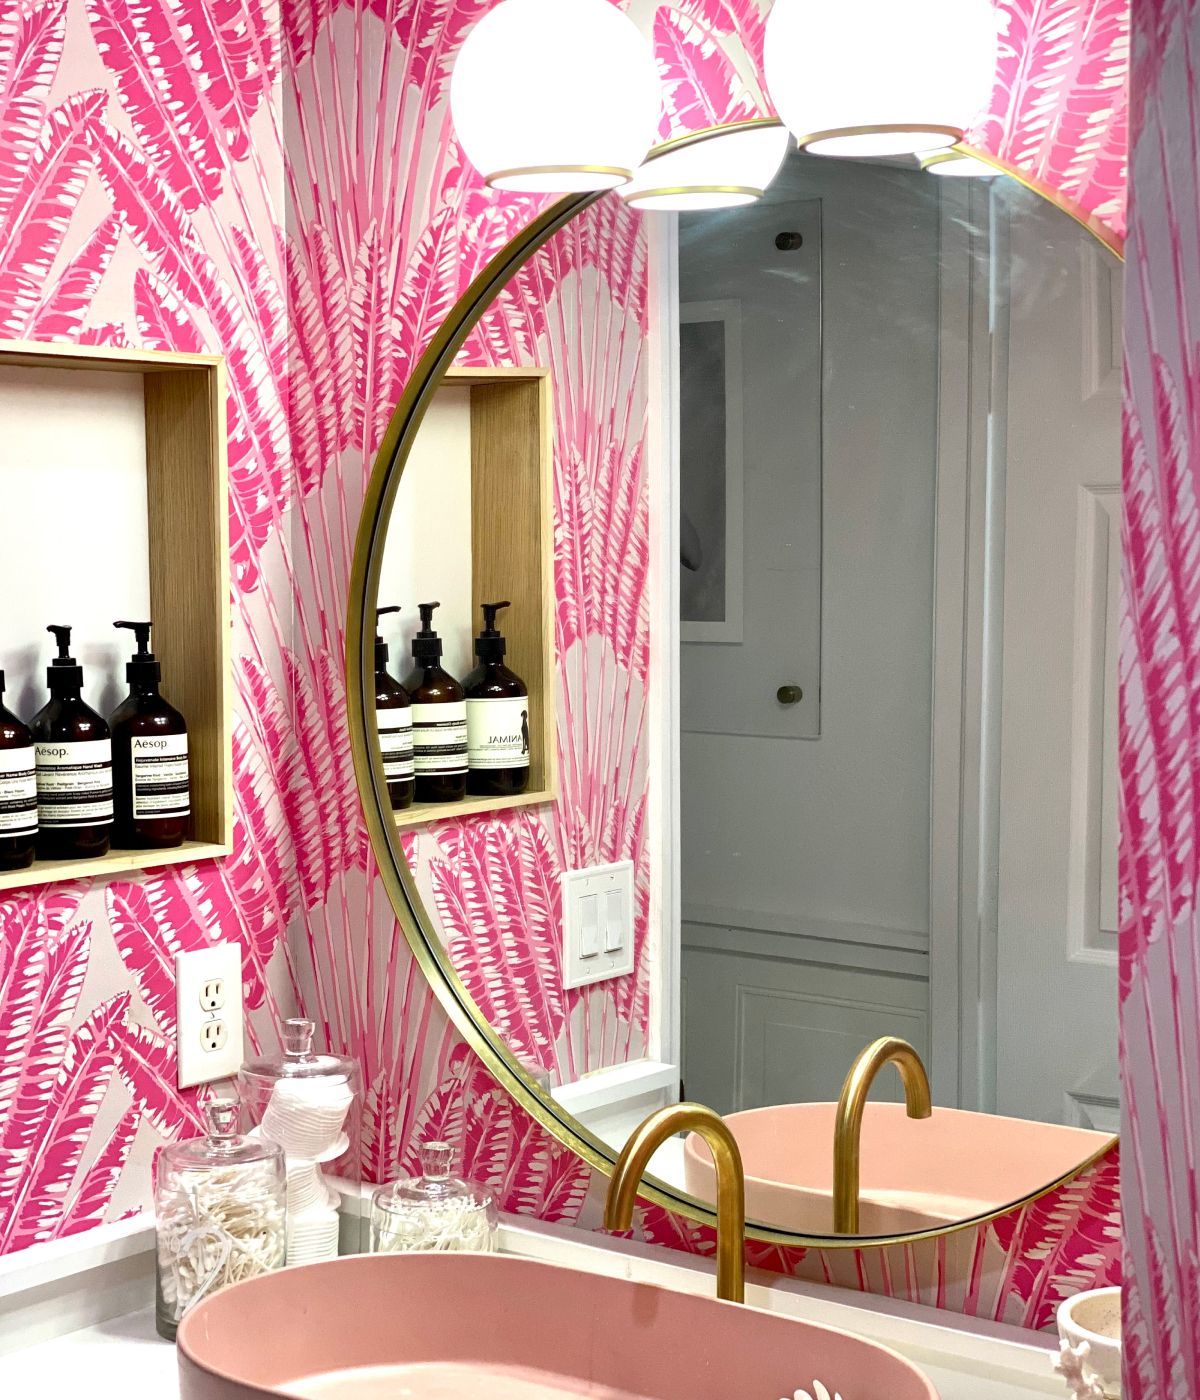 Magenta feather palm design in bathroom with gold and blush pink accents.